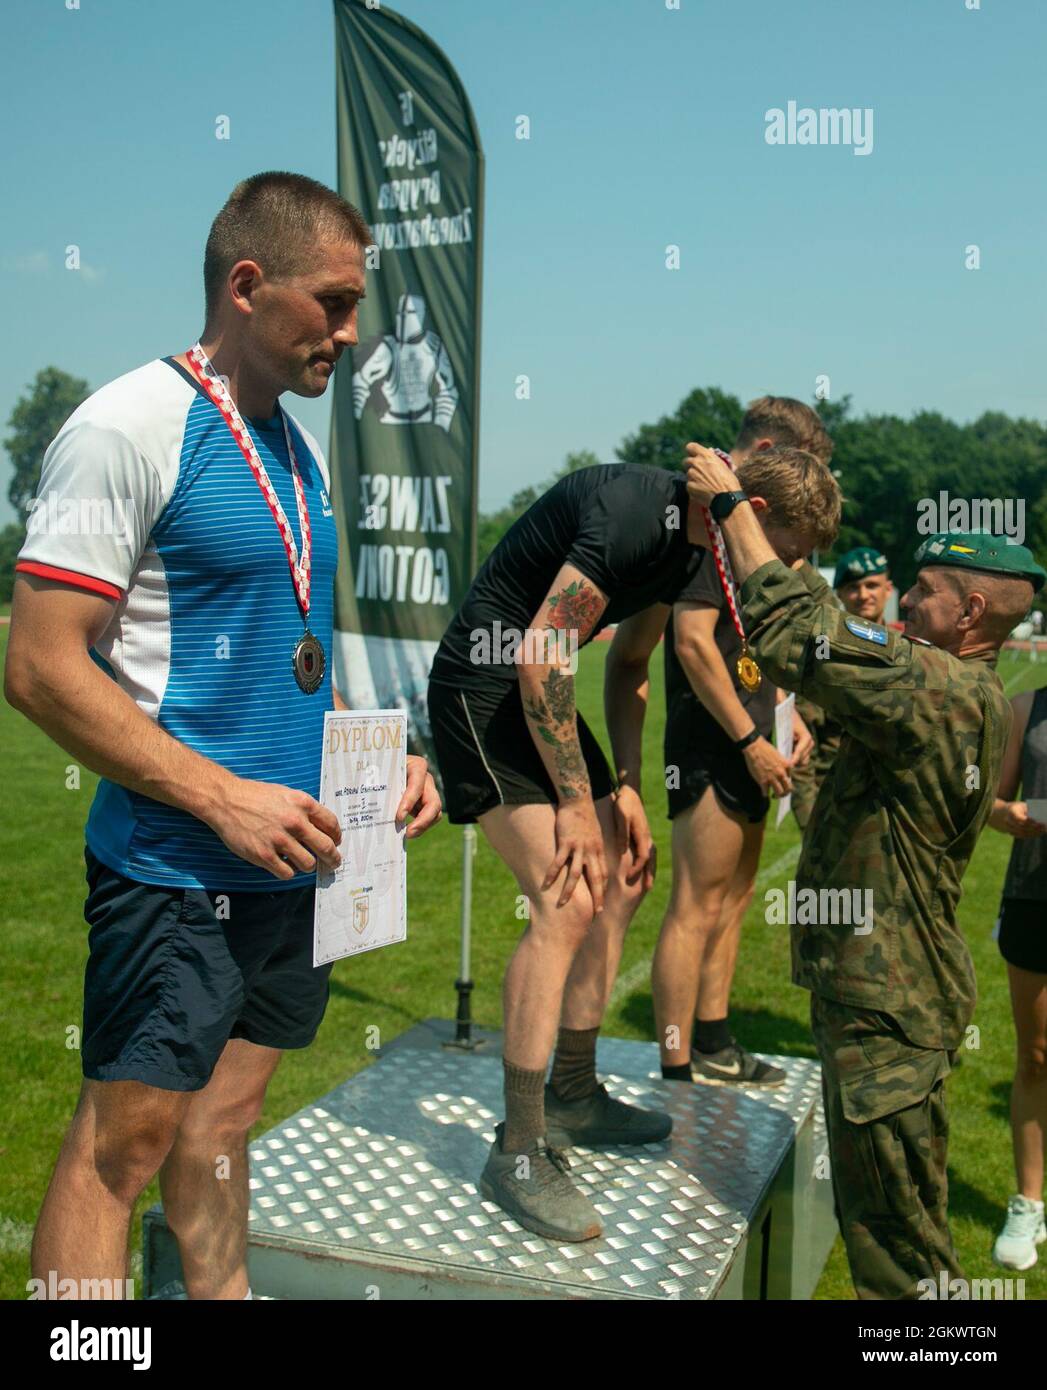 Brig. Gen. Bogdan Rycerski, Polish Land Forces, 15th Mechanized Brigade commander, presents the 800 meter race first place medal to British Army Pvt. Clyde Brayce at Stadion Miejski MOSIR in Giżycko, Poland July 13, 2021. Battle Group Poland had 40 competitors representing the U.S. Army, British Army and Romanian Land Forces compete in the track and field event, which included 100 meter, 400 meter, 800 meter and 4 X 400 meter races as well as, javelin throw, shot put, and long jump competitions. The inaugral multinational track and field event was held to celebrate Polish Land Forces 15th Mech Stock Photo